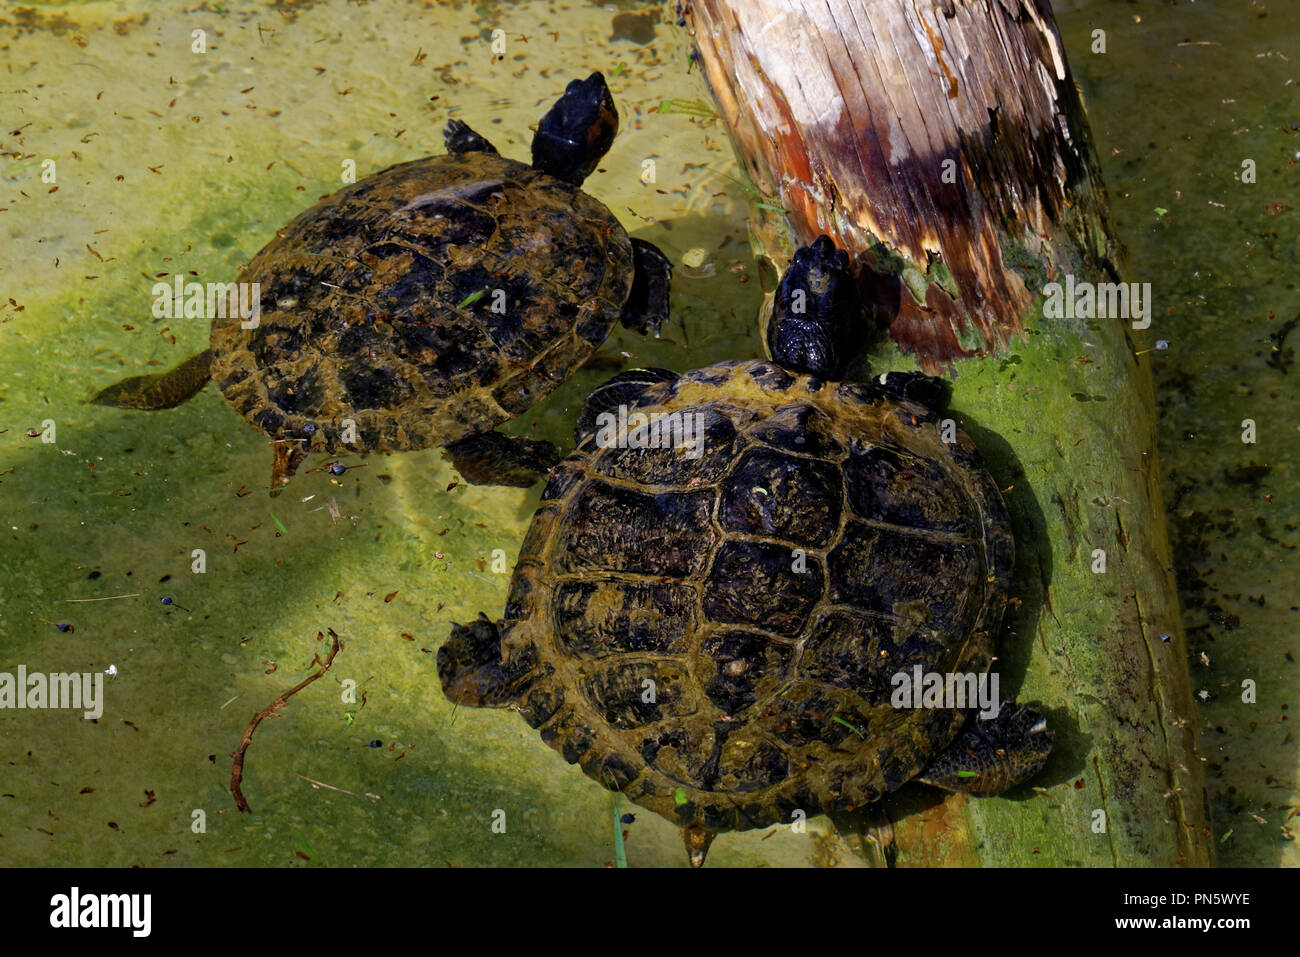 Red-eared sliders in a swimming pool Stock Photo